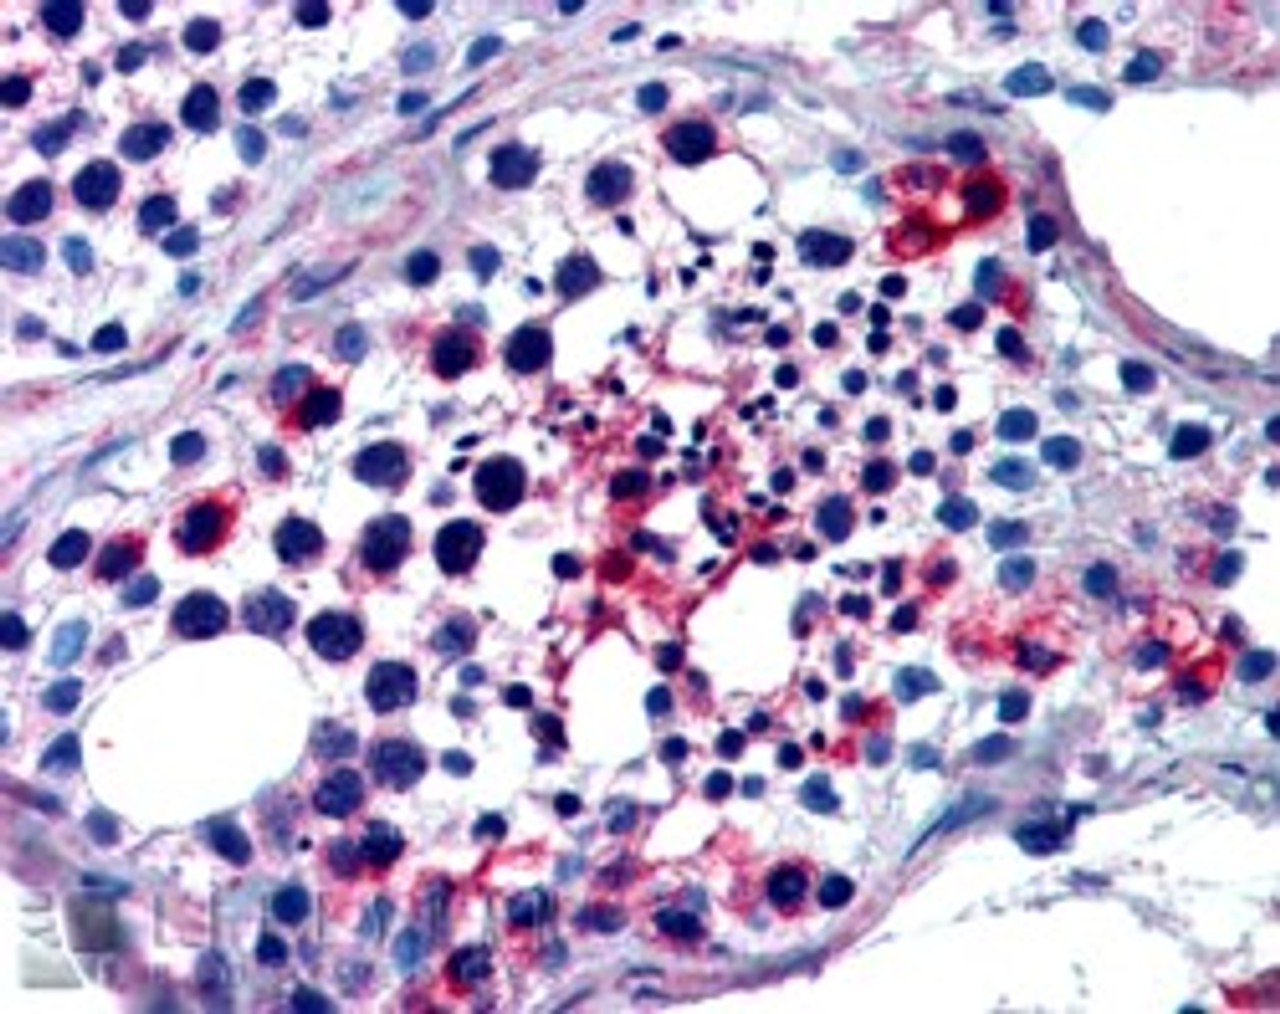 45-591 (2.5ug/ml) staining of paraffin embedded Human Testis. Steamed antigen retrieval with citrate buffer pH 6, AP-staining.